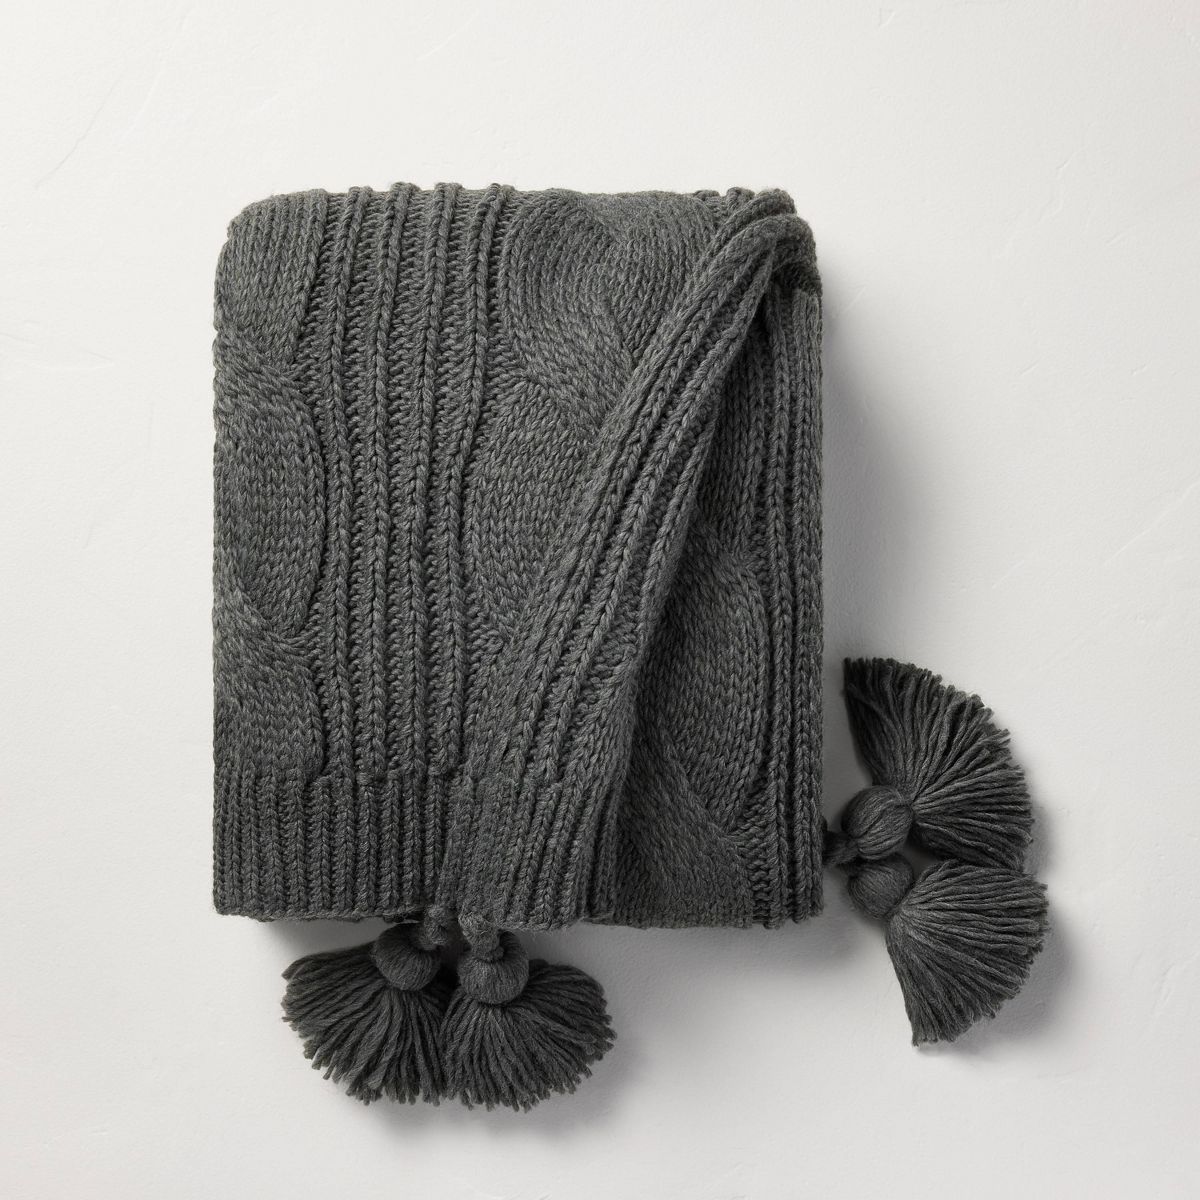 Chunky Cable Knit Throw Blanket Dark Gray - Hearth & Hand™ with Magnolia | Target